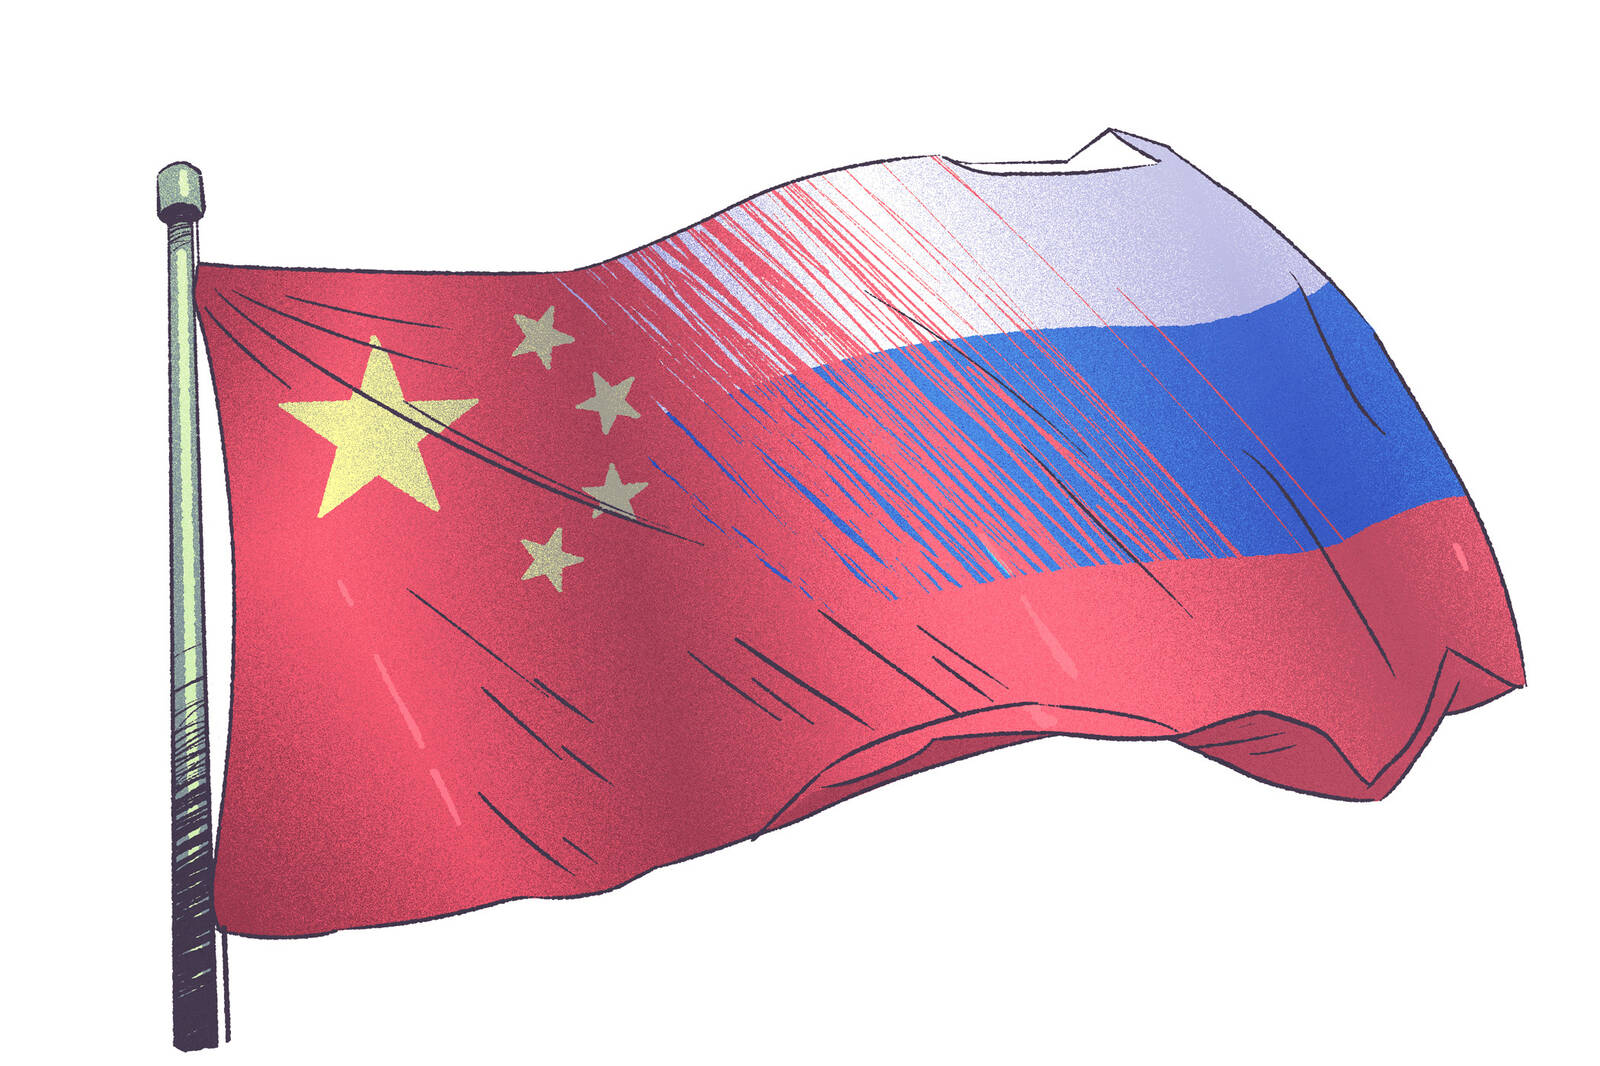 a flag melding china and russia flags